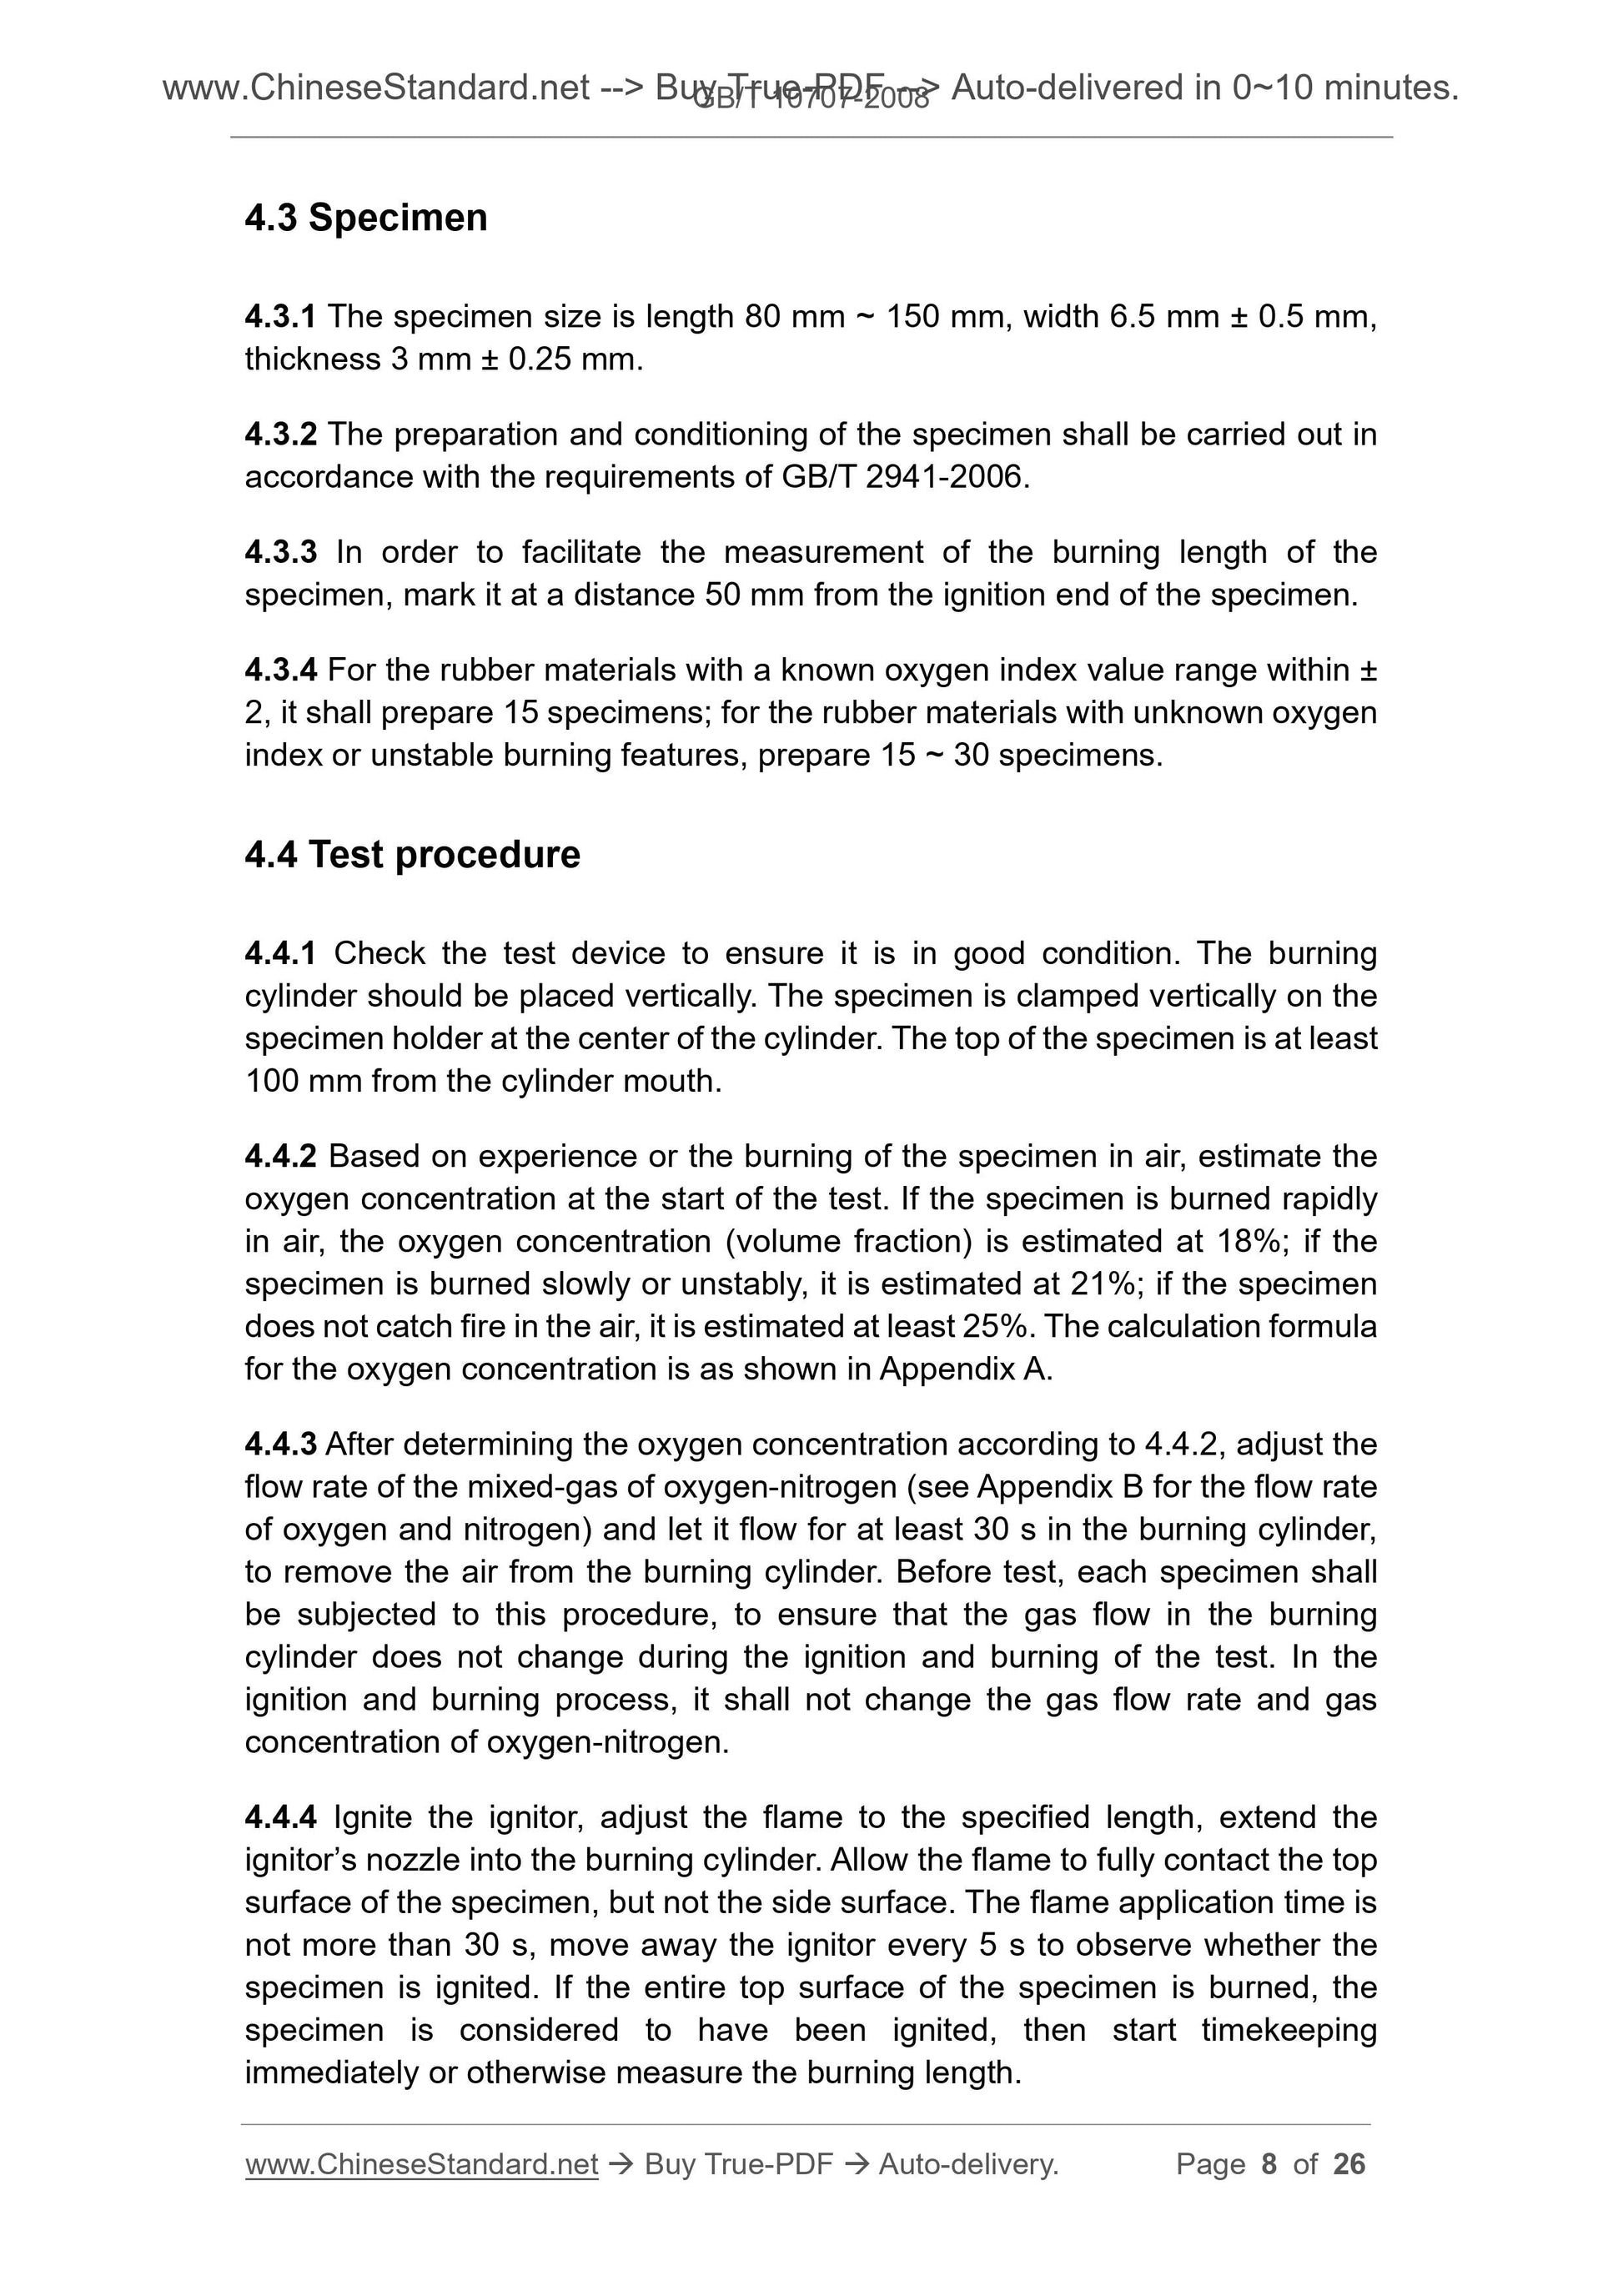 GB/T 10707-2008 Page 4